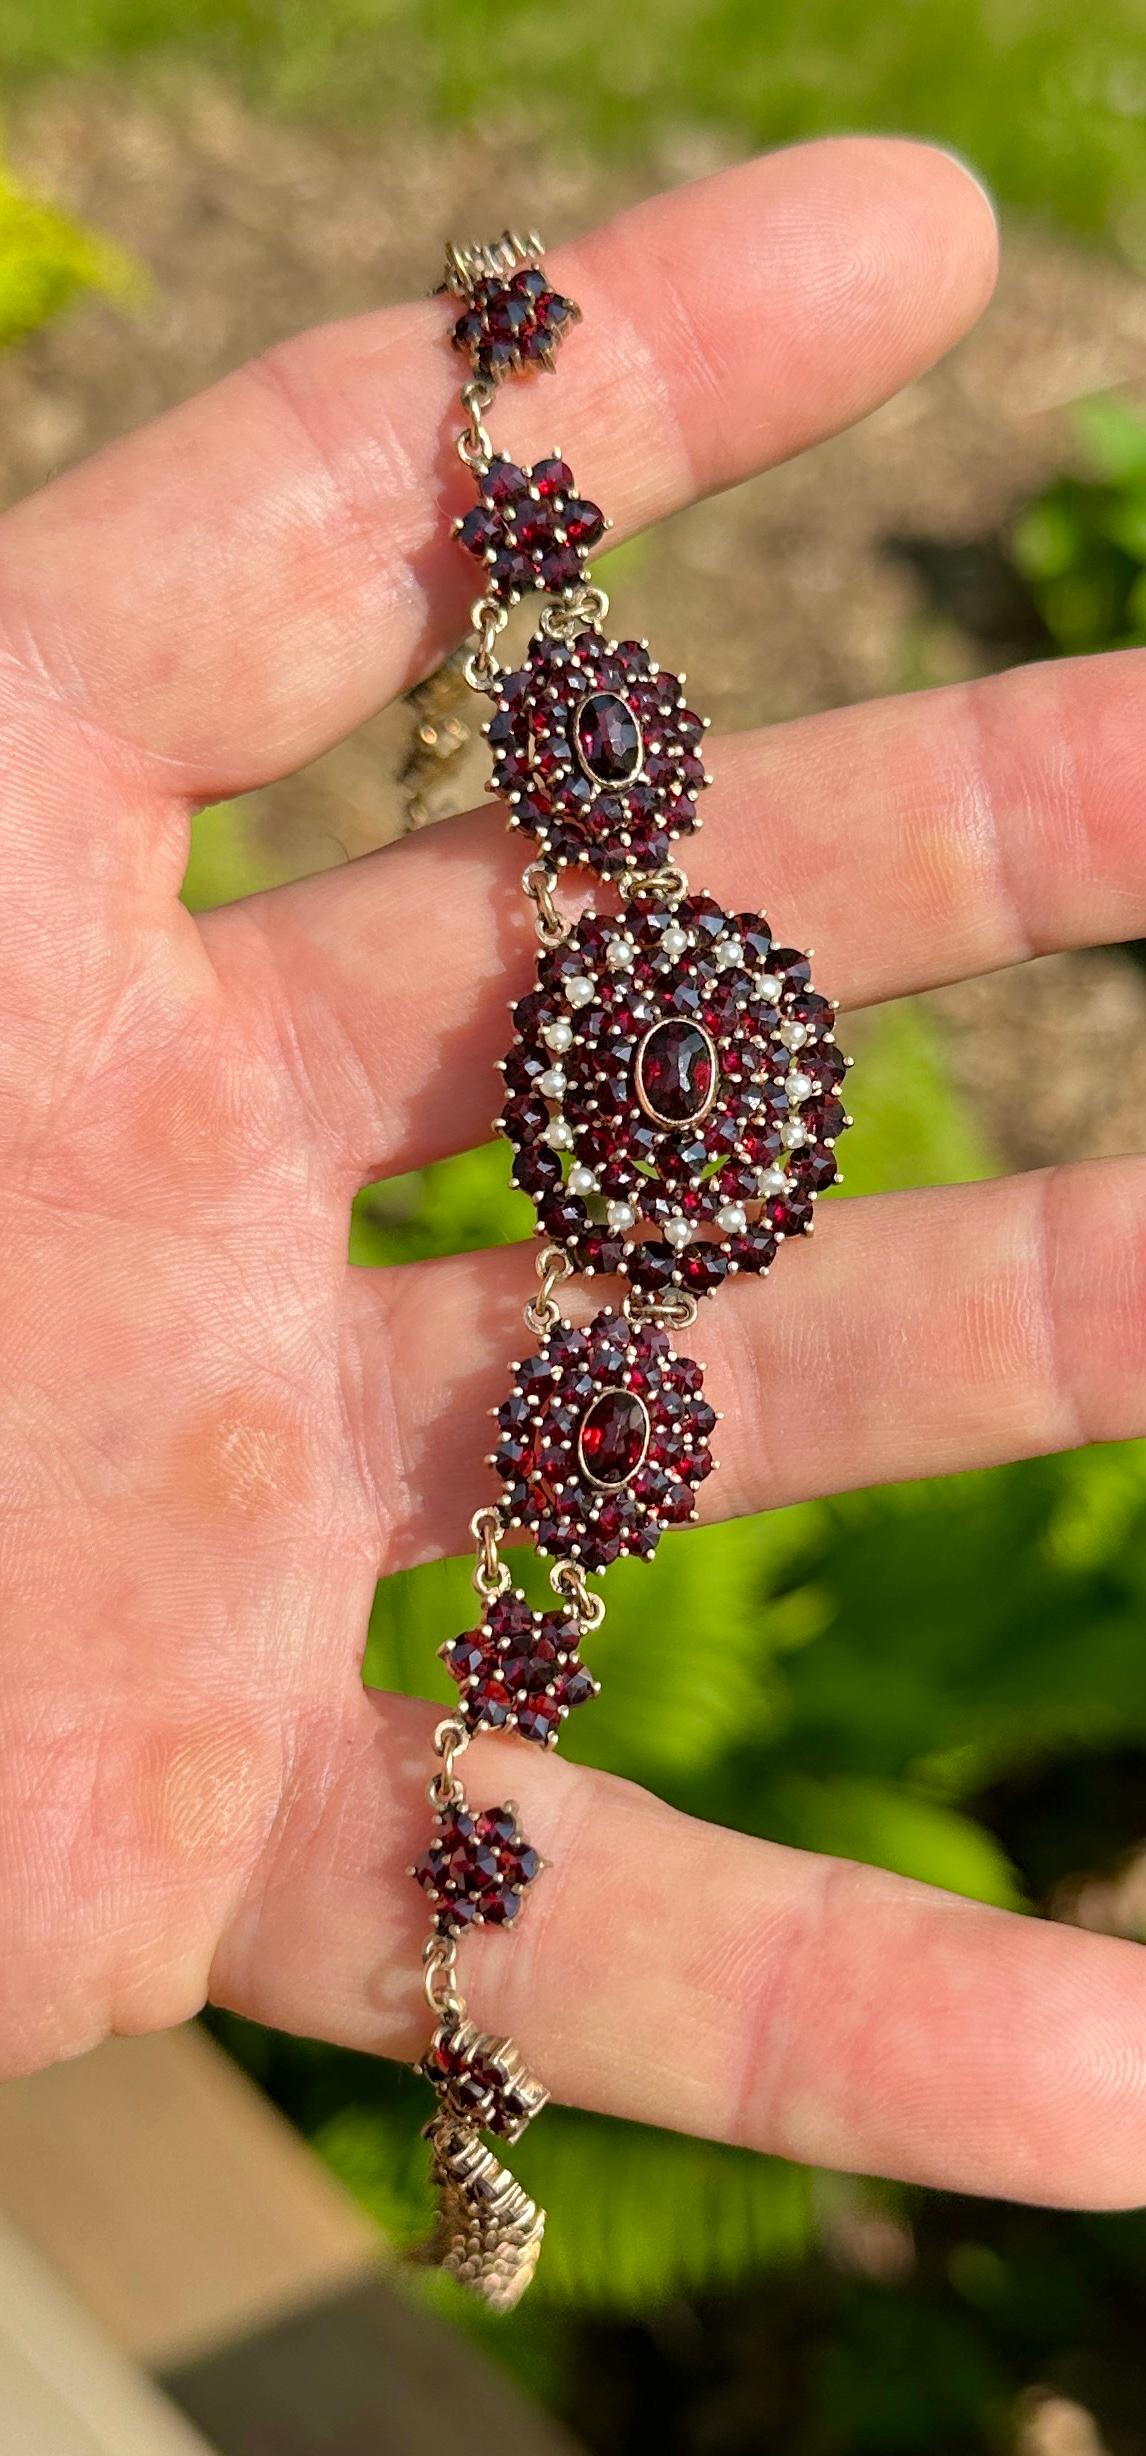 THIS IS AN ABSOLUTELY GORGEOUS 17 INCH ANTIQUE VICTORIAN BELLE EPOQUE BOHEMIAN GARNET AND PEARL NECKLACE WITH FLOWER FLORETS IN THE CHAIN OF SUPERB DEEP RED WINE GARNETS OF THE HIGHEST QUALITY DATING TO CIRCA 1900-1930. THE NECKLACE IS